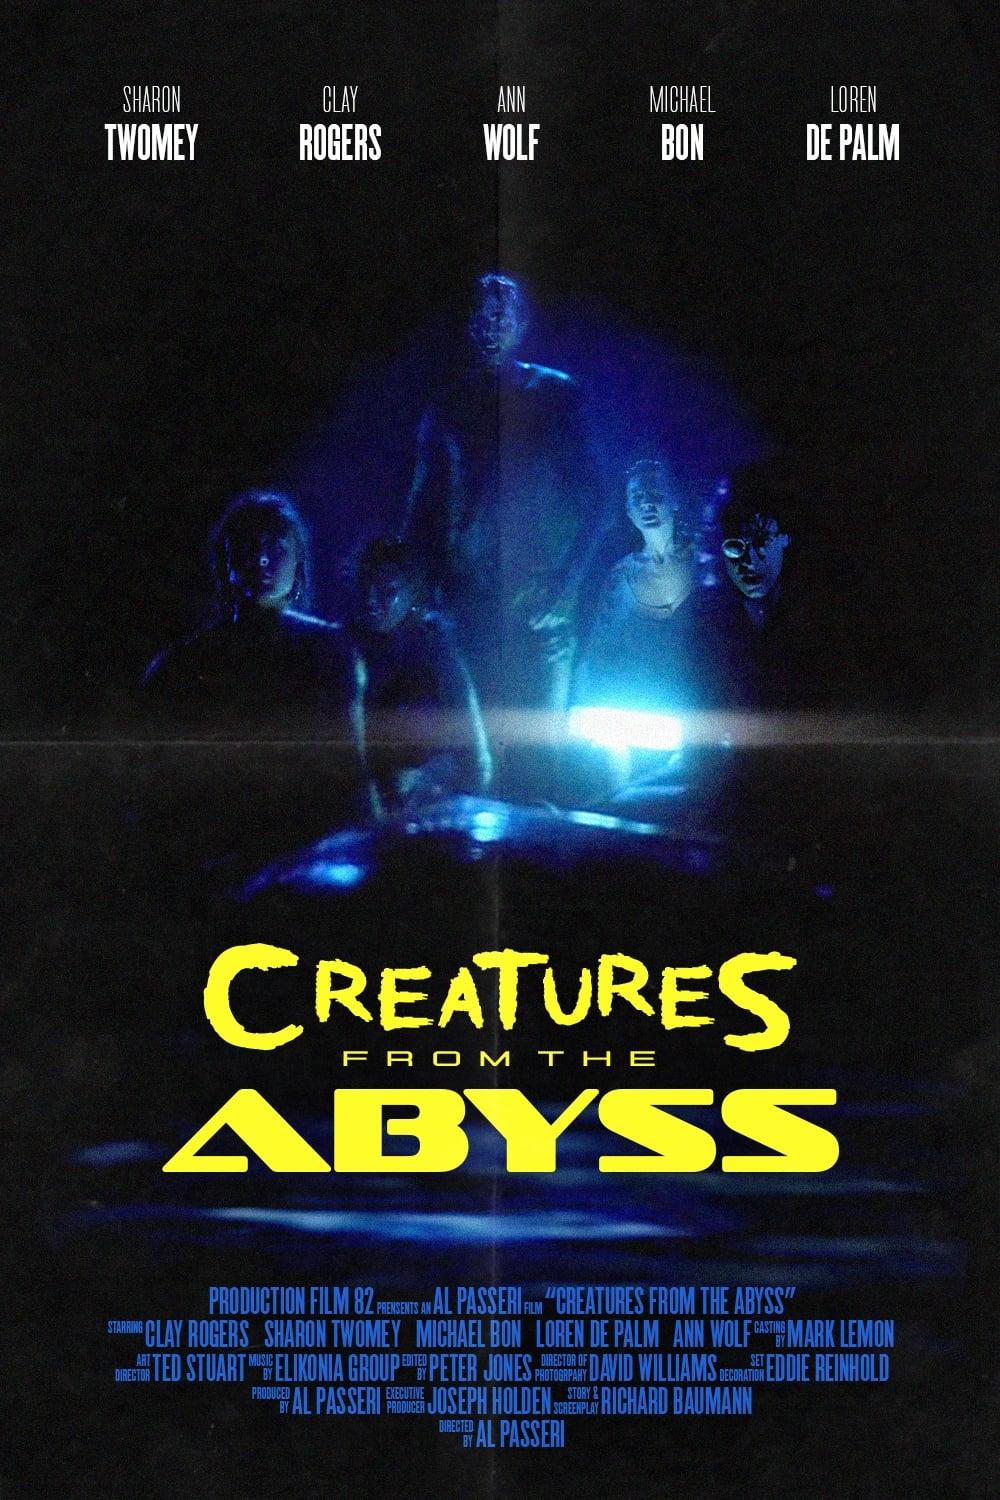 Creatures from the Abyss poster